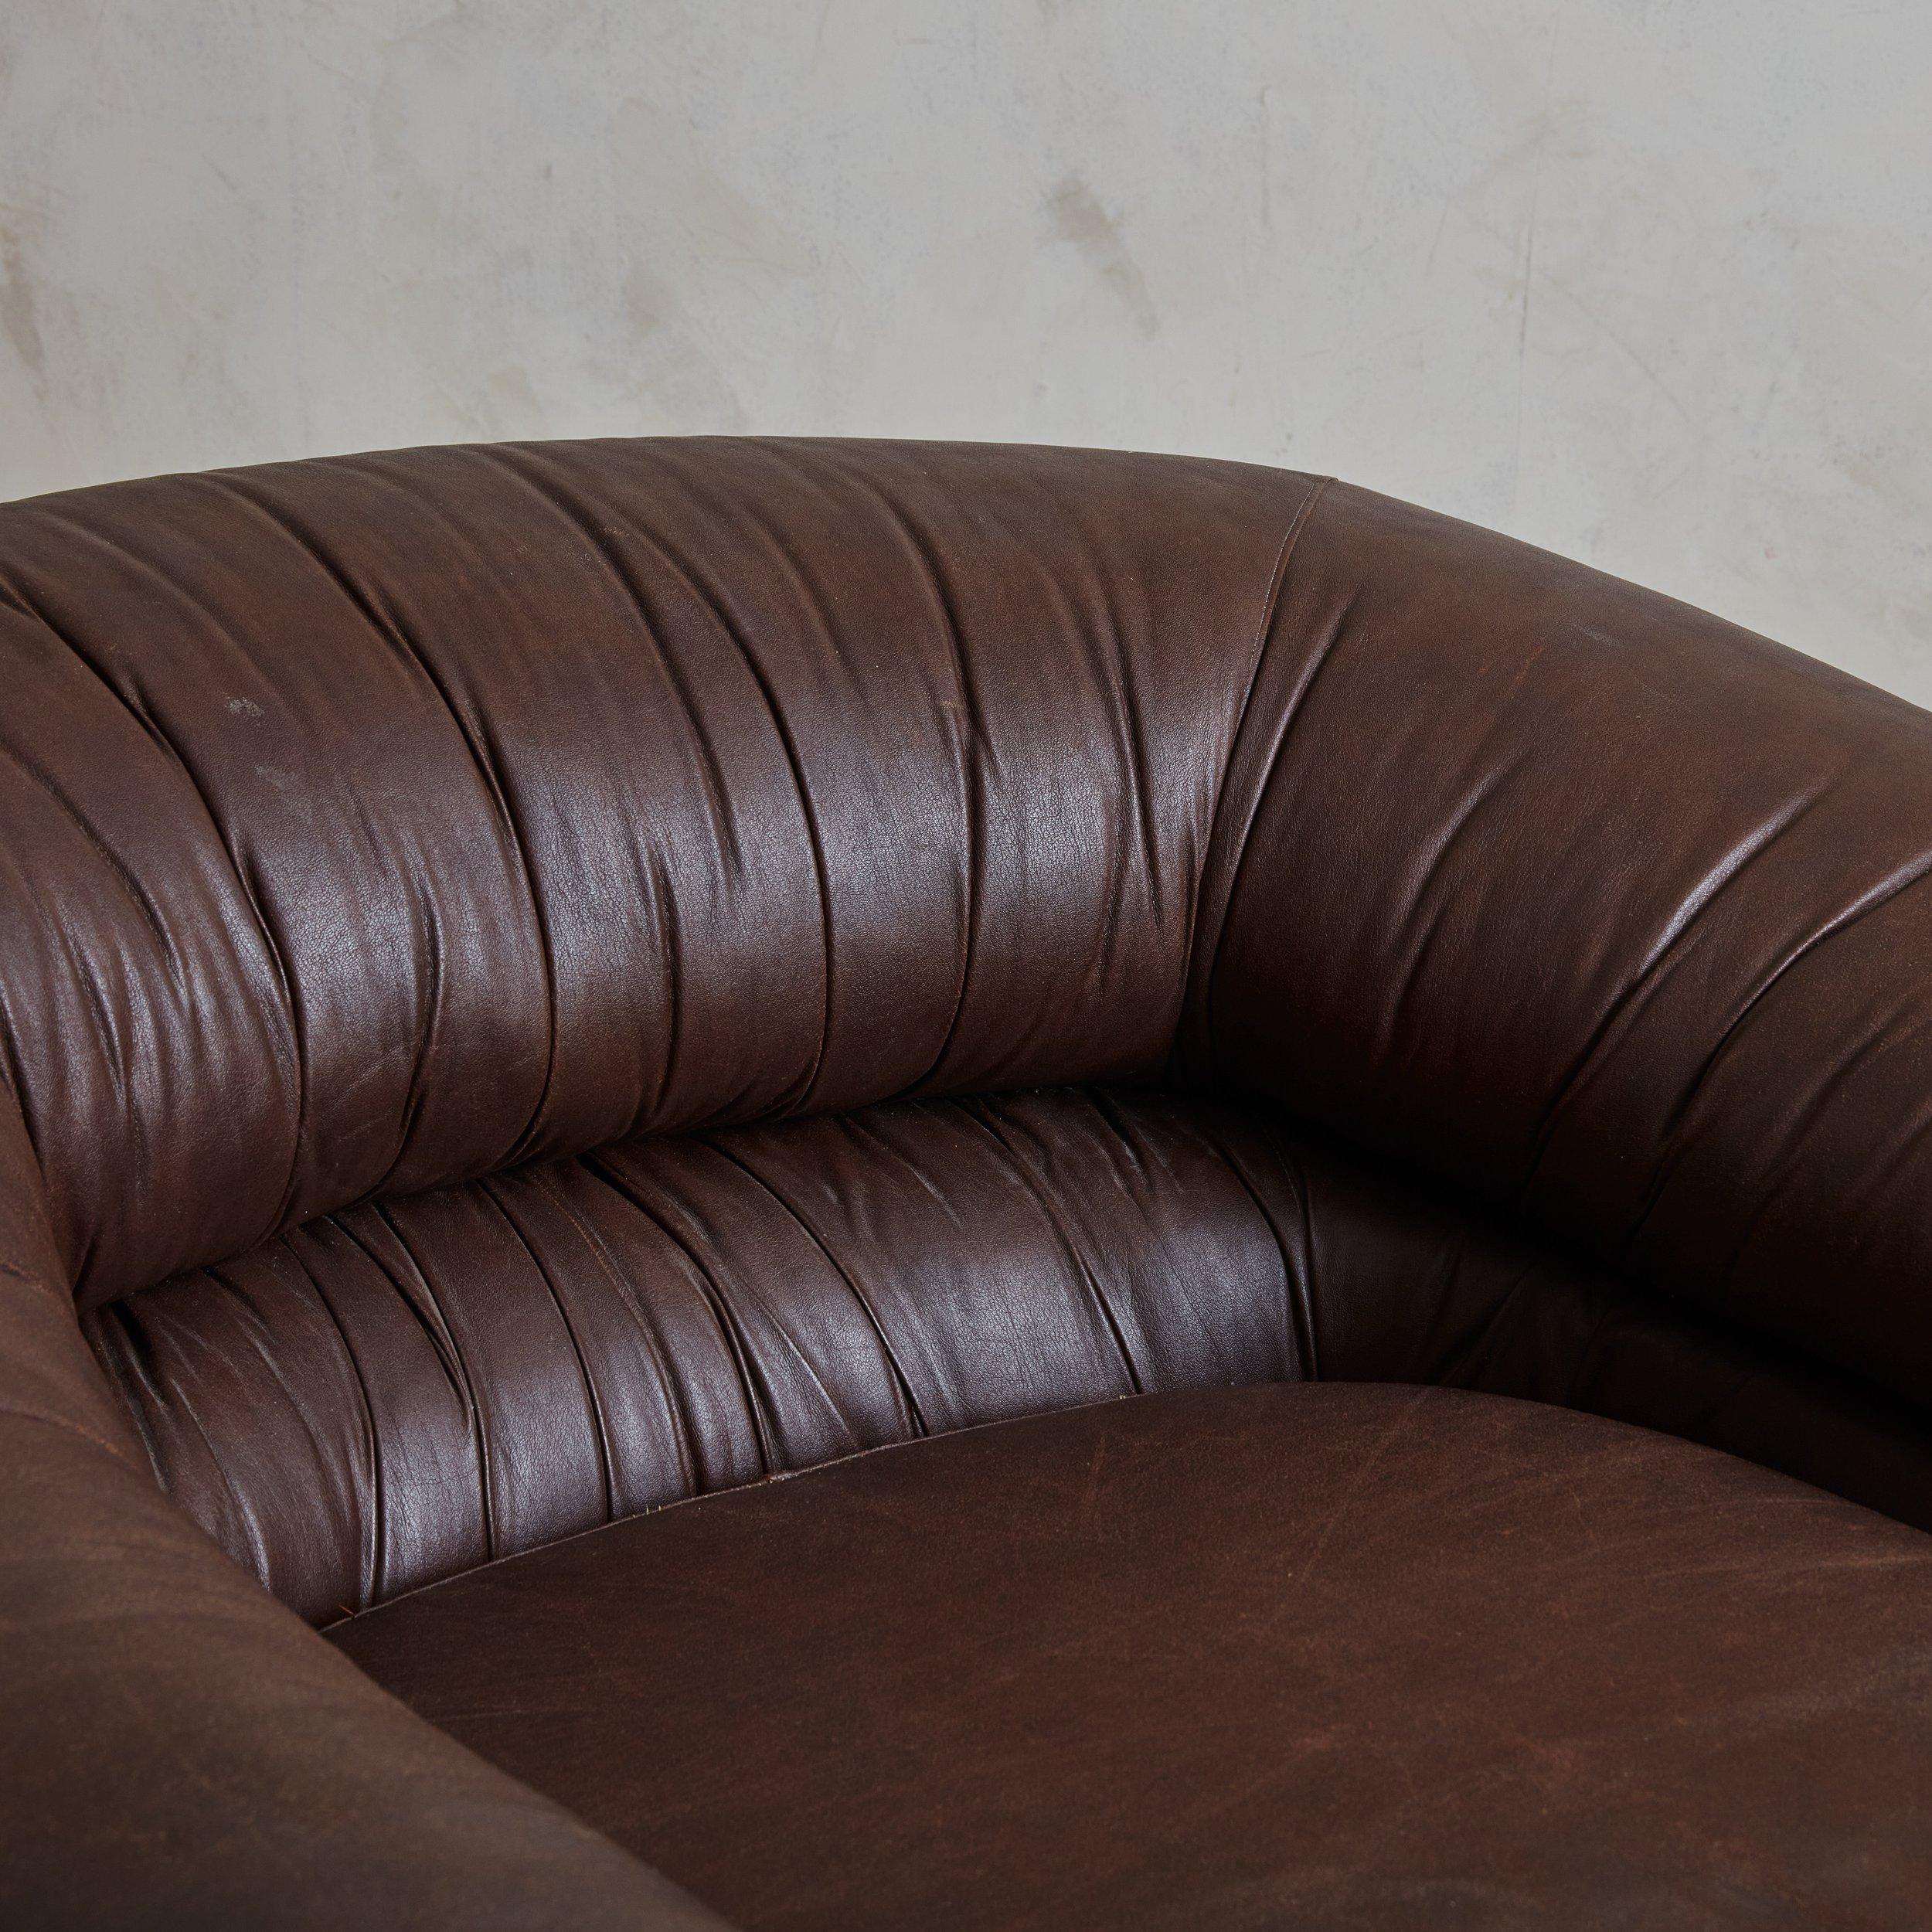 Mid-20th Century Pair of Large Brown Leather Lounge Chairs by de Pas, D’Urbino & Lomazzi, Italy For Sale